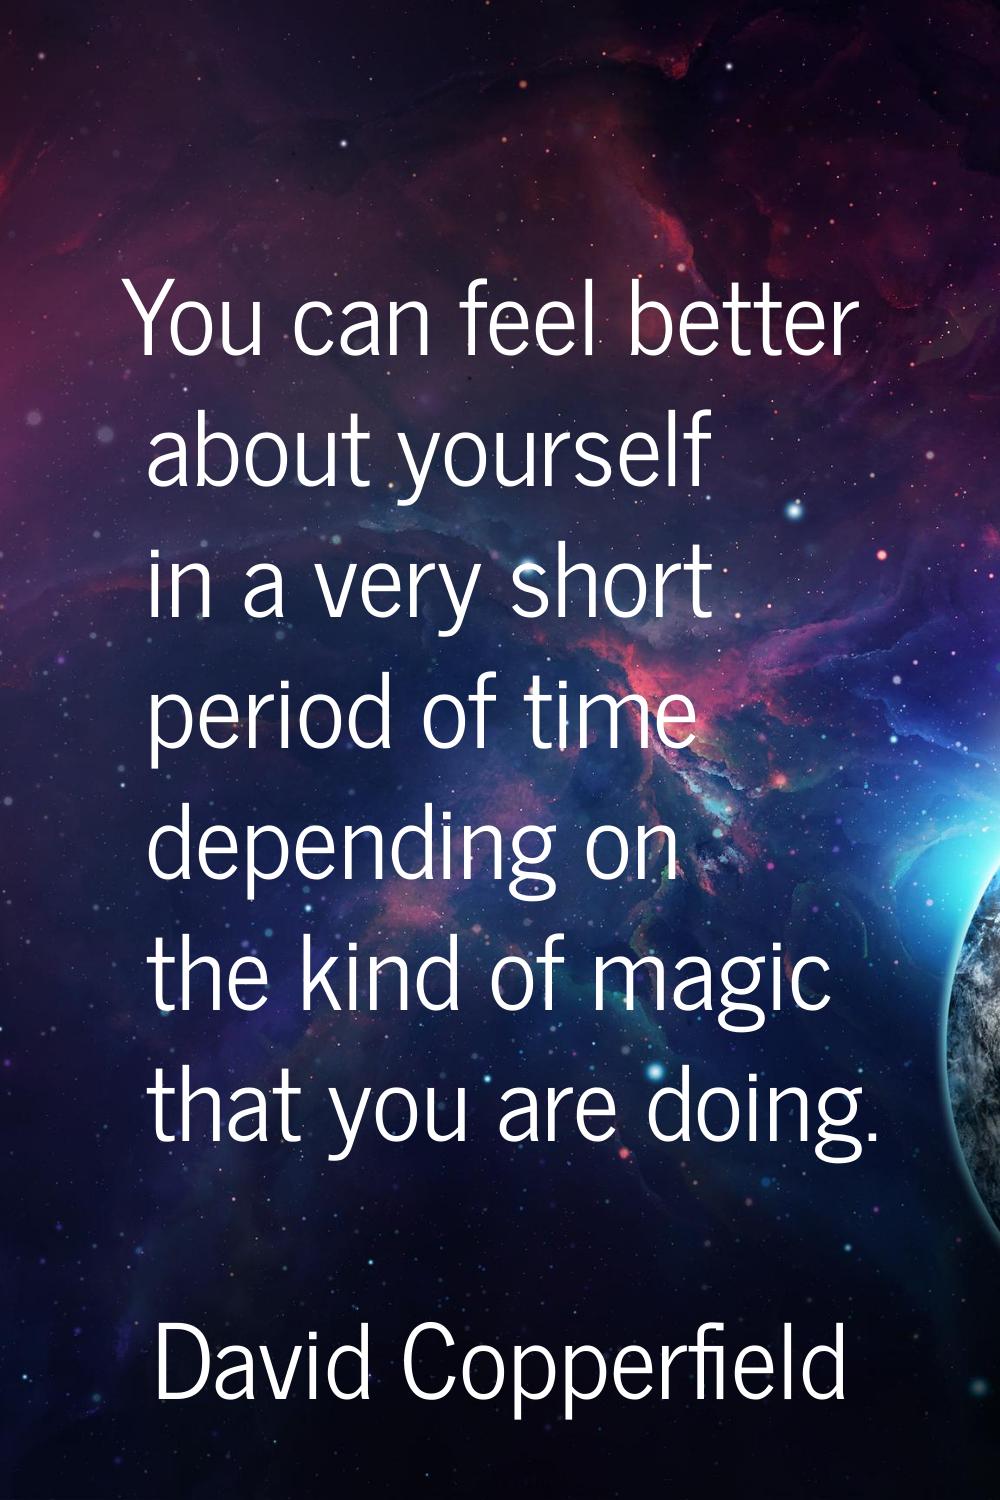 You can feel better about yourself in a very short period of time depending on the kind of magic th